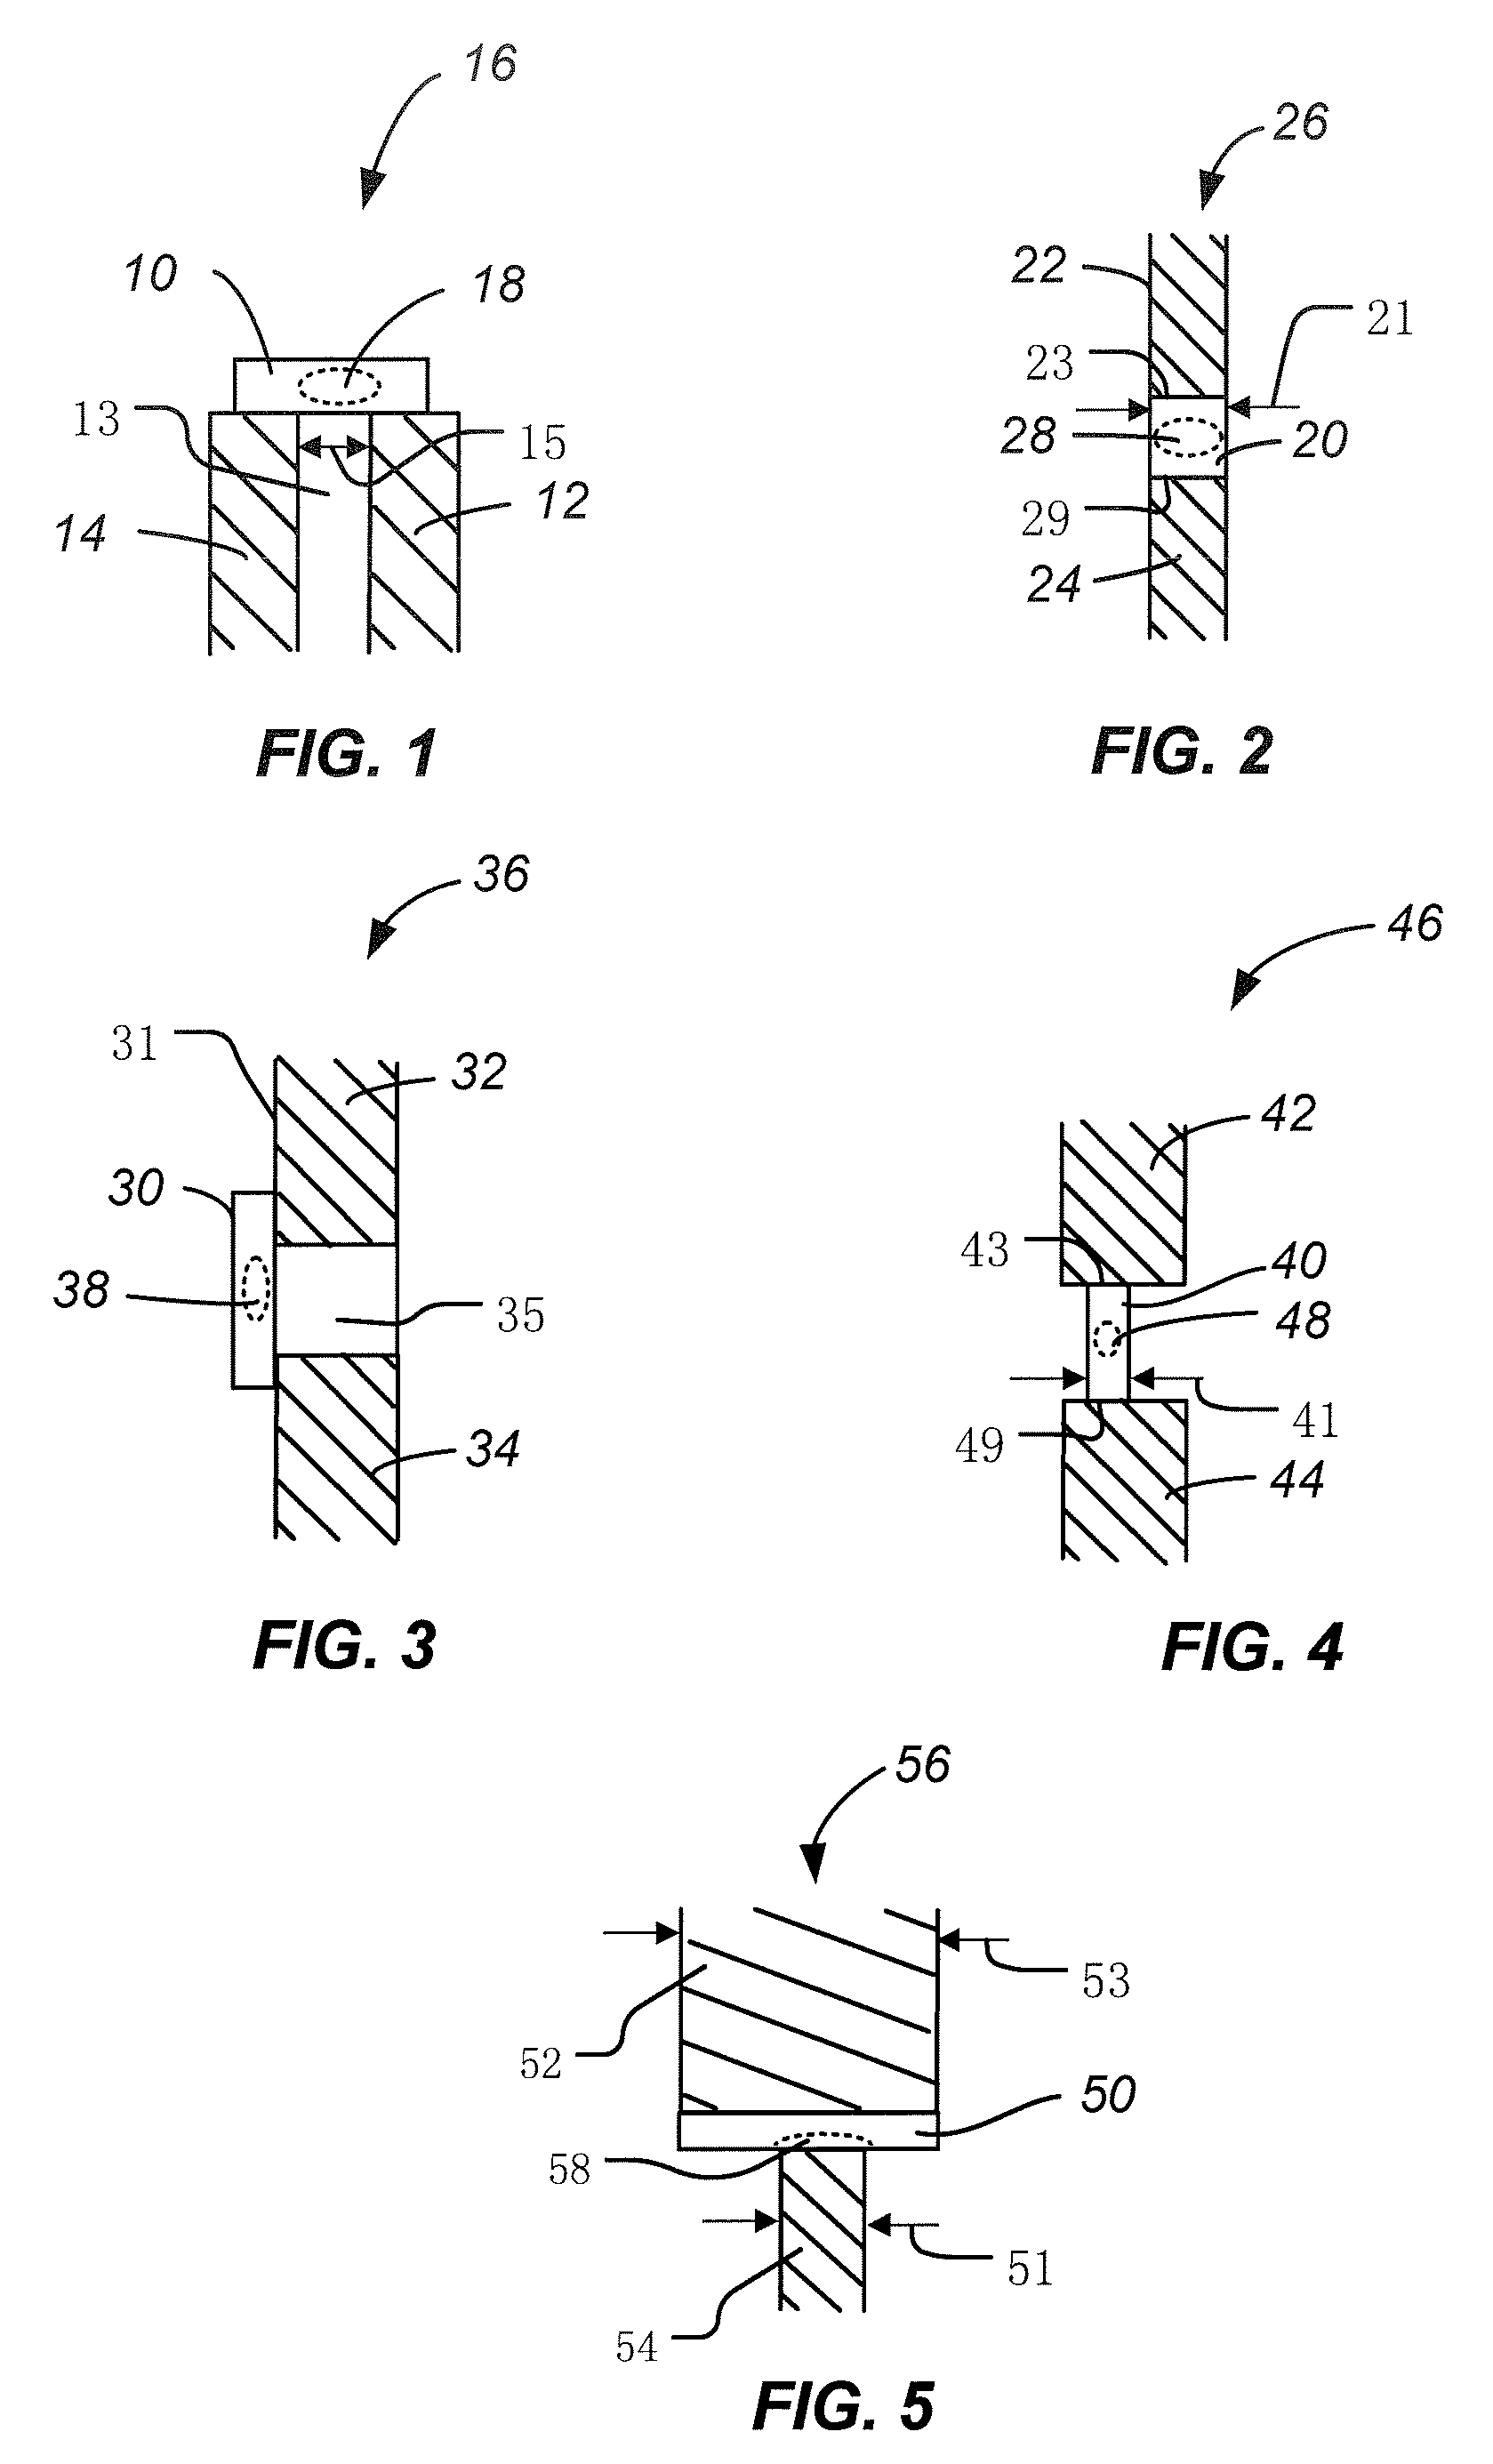 Memory cell device and programming methods